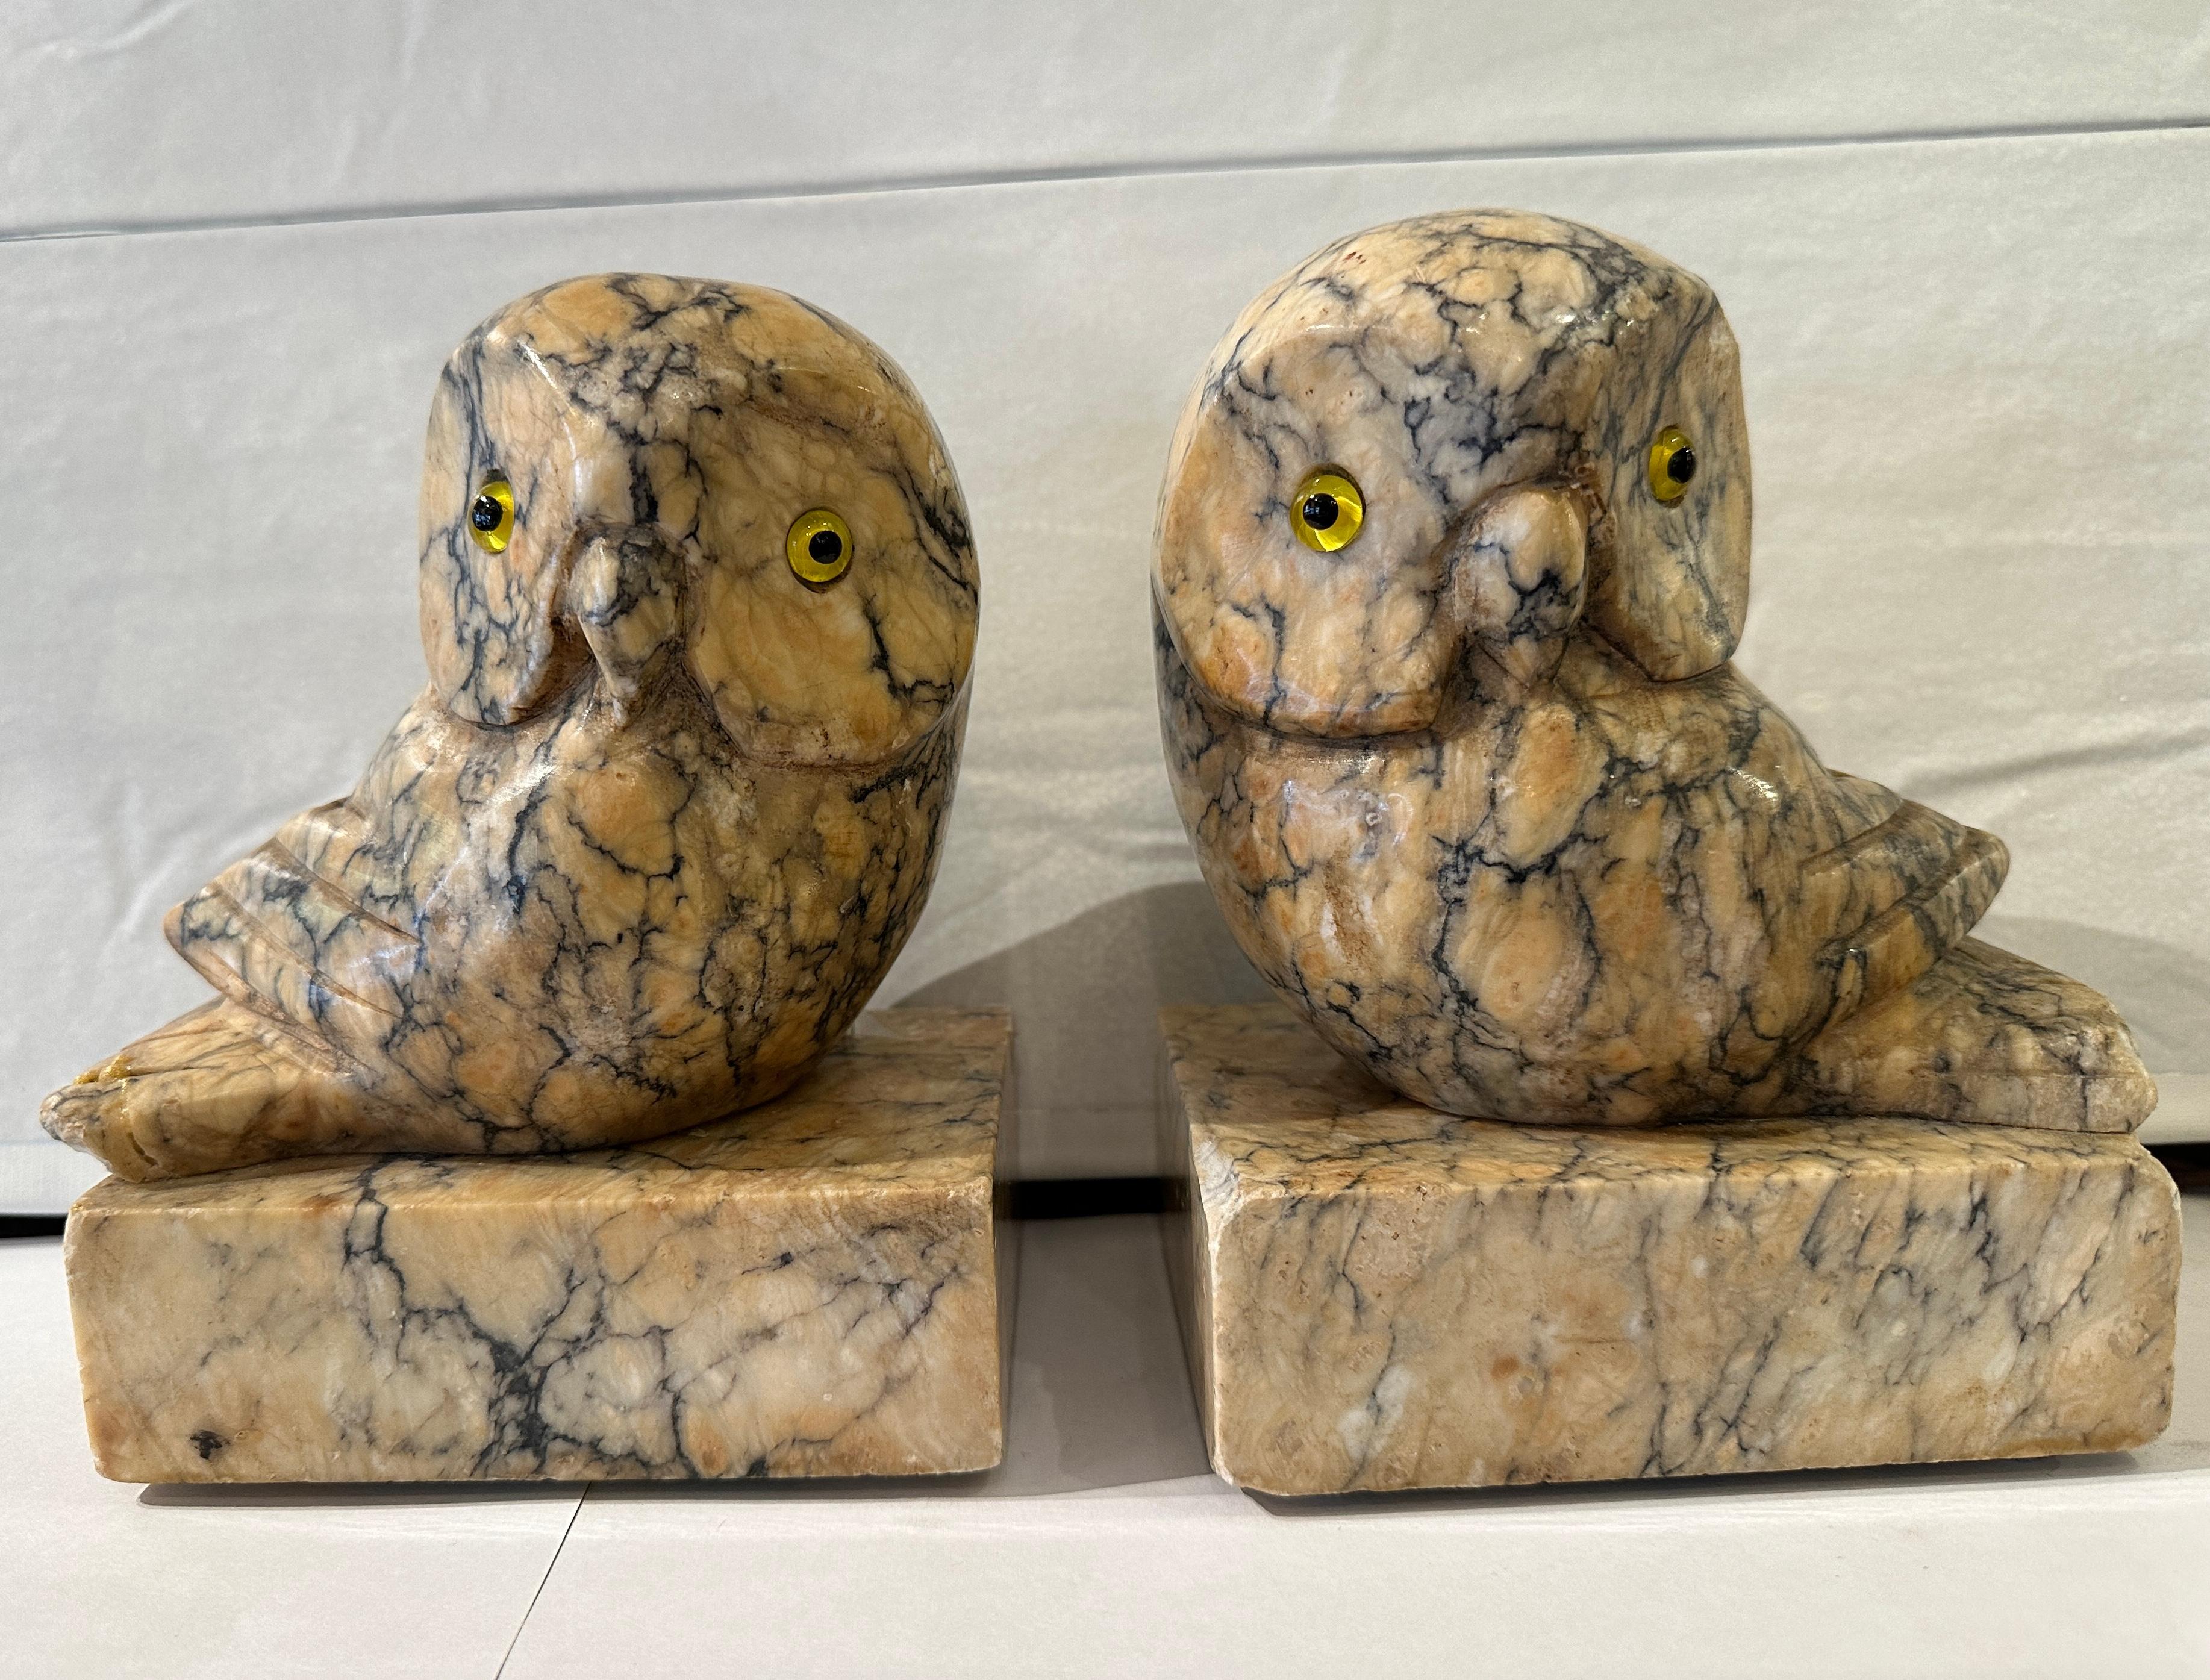 Pair of owl alabaster bookends. Charming pair with glass eyes.
Nicely worn age patina.